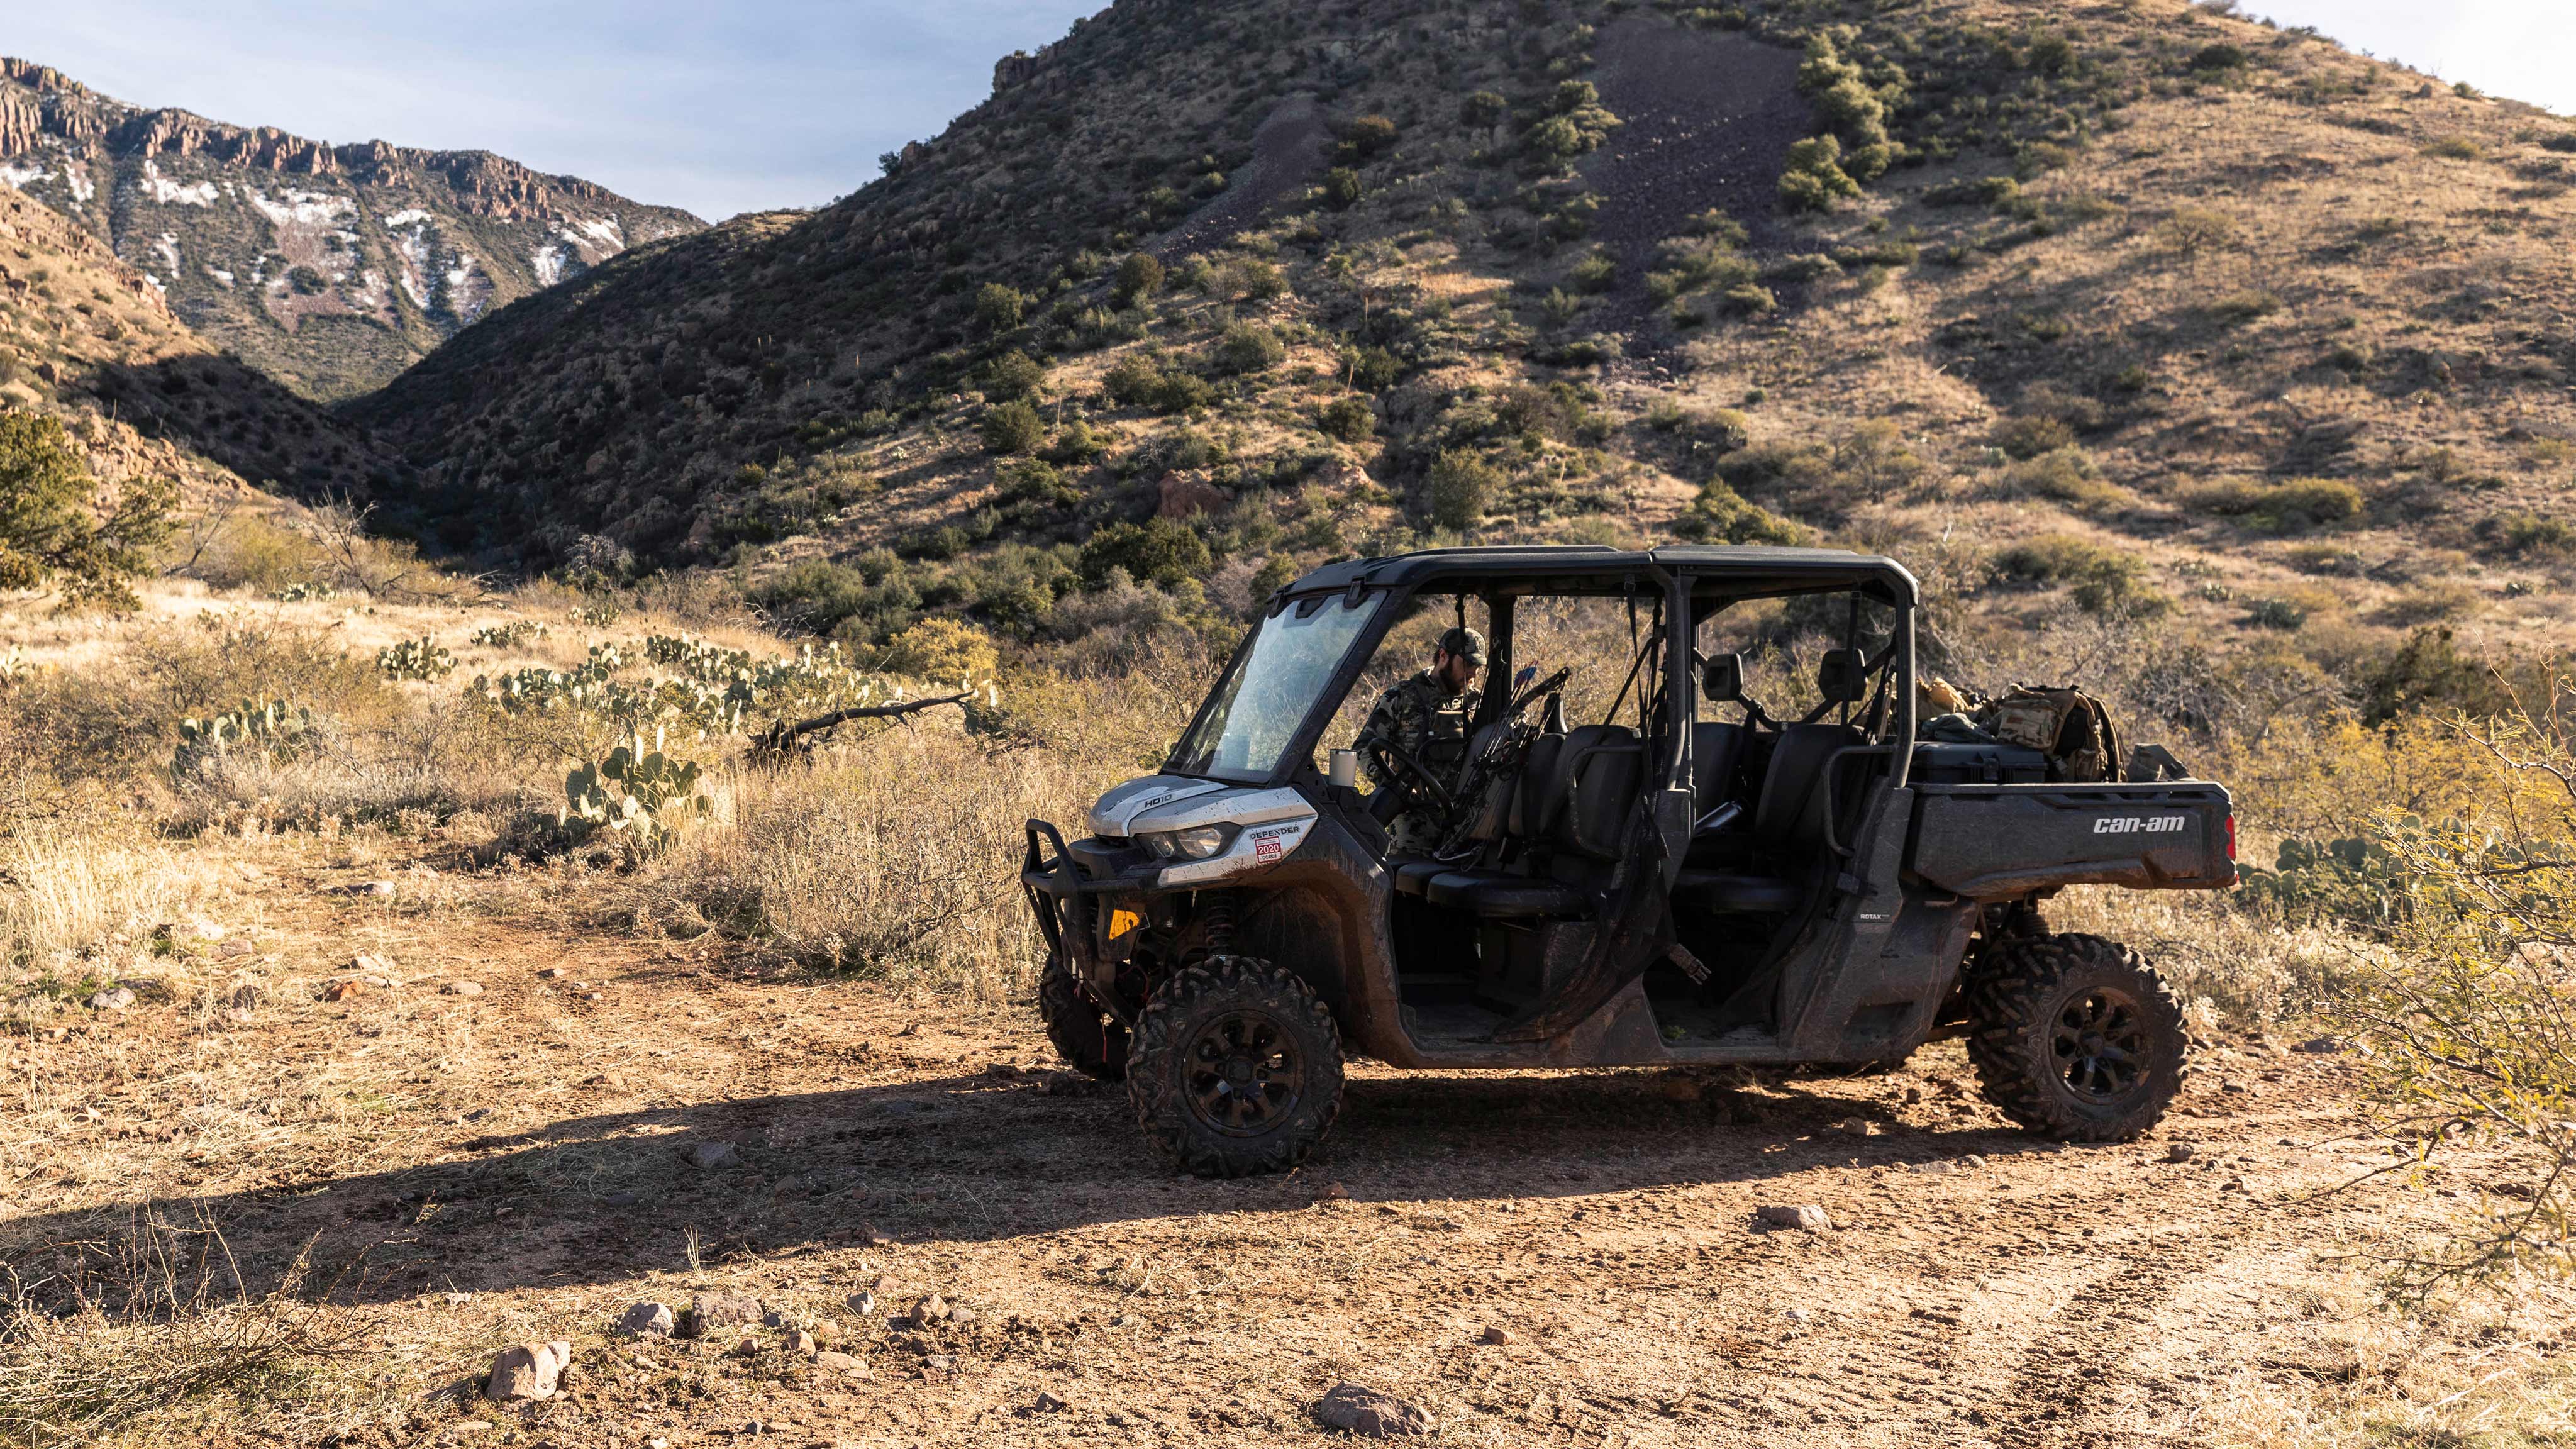 Kelby Fassiotto - Photographer, hunter, and Can-Am off-roader